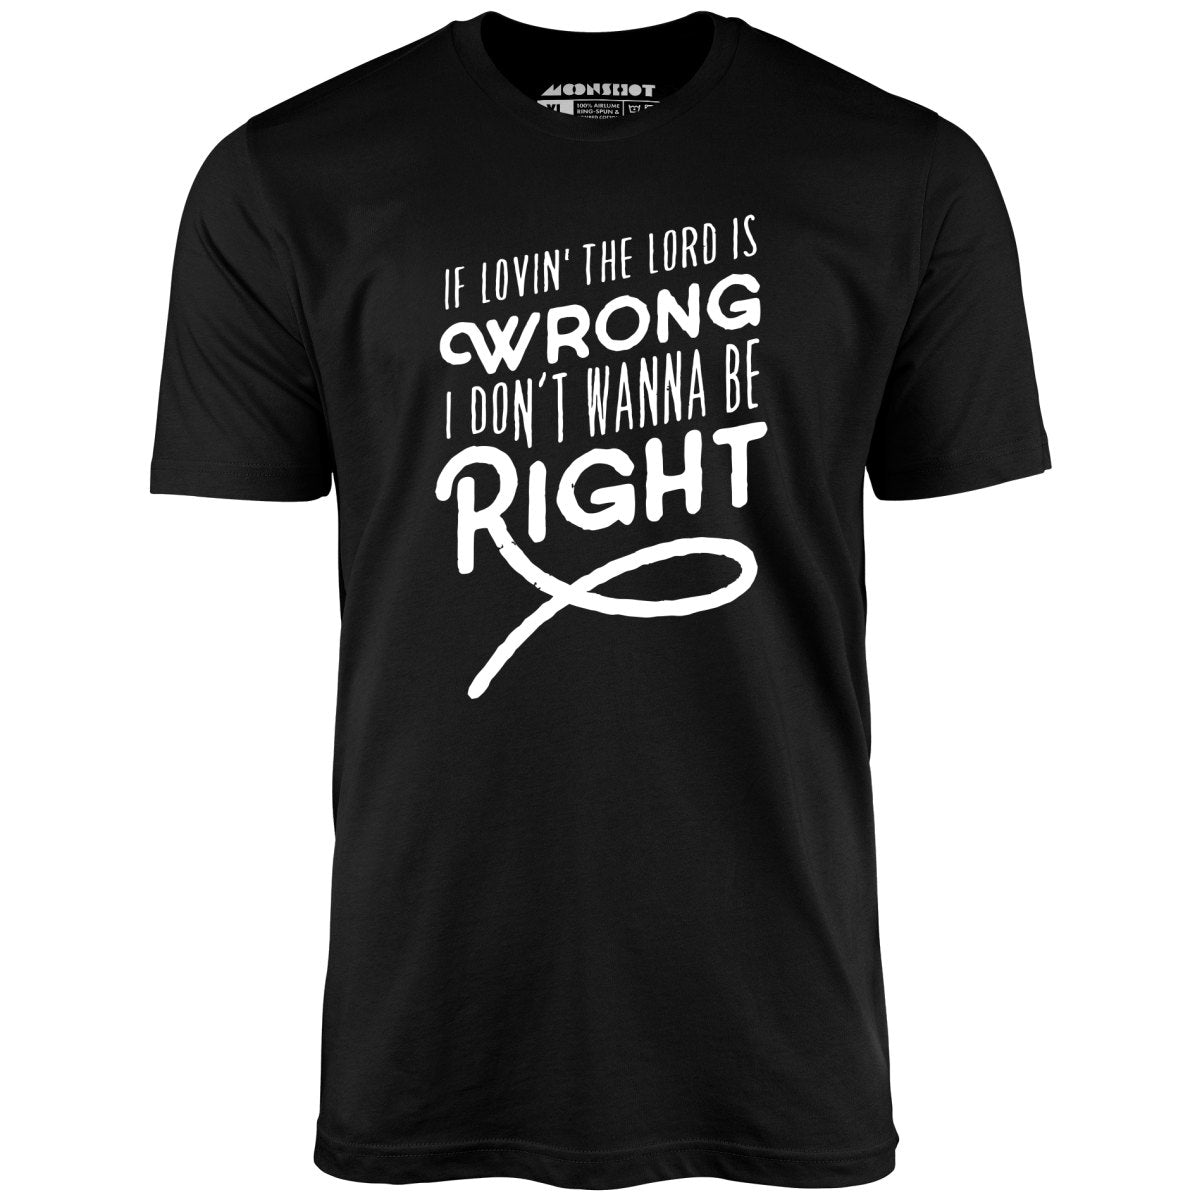 If Lovin the Lord is Wrong I Don't Wanna Be Right - Unisex T-Shirt